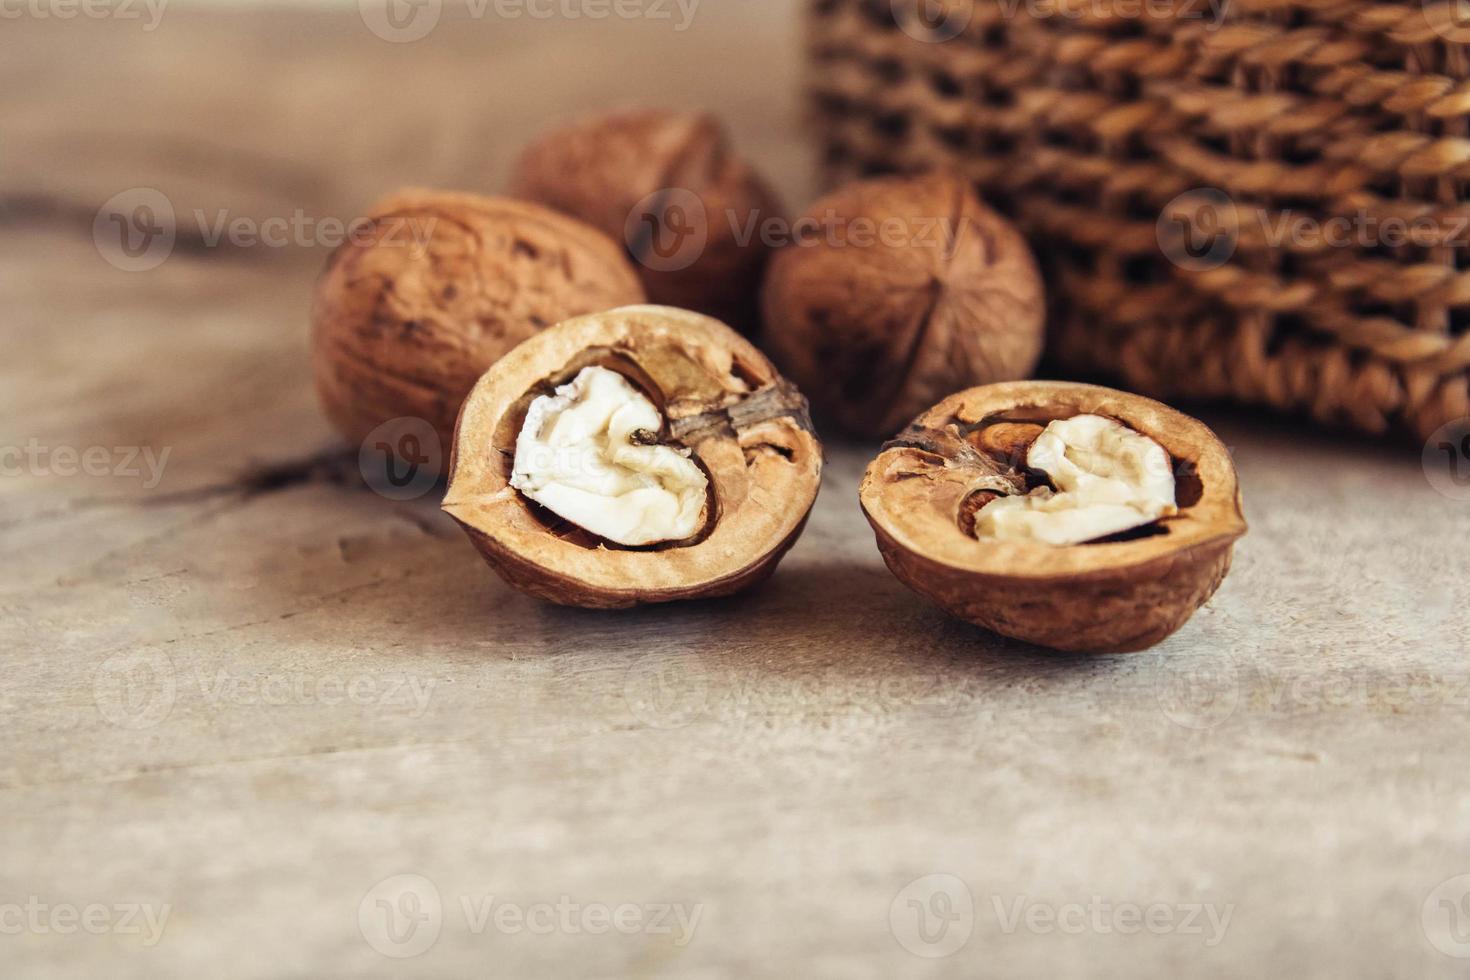 Walnuts on a wooden background photo